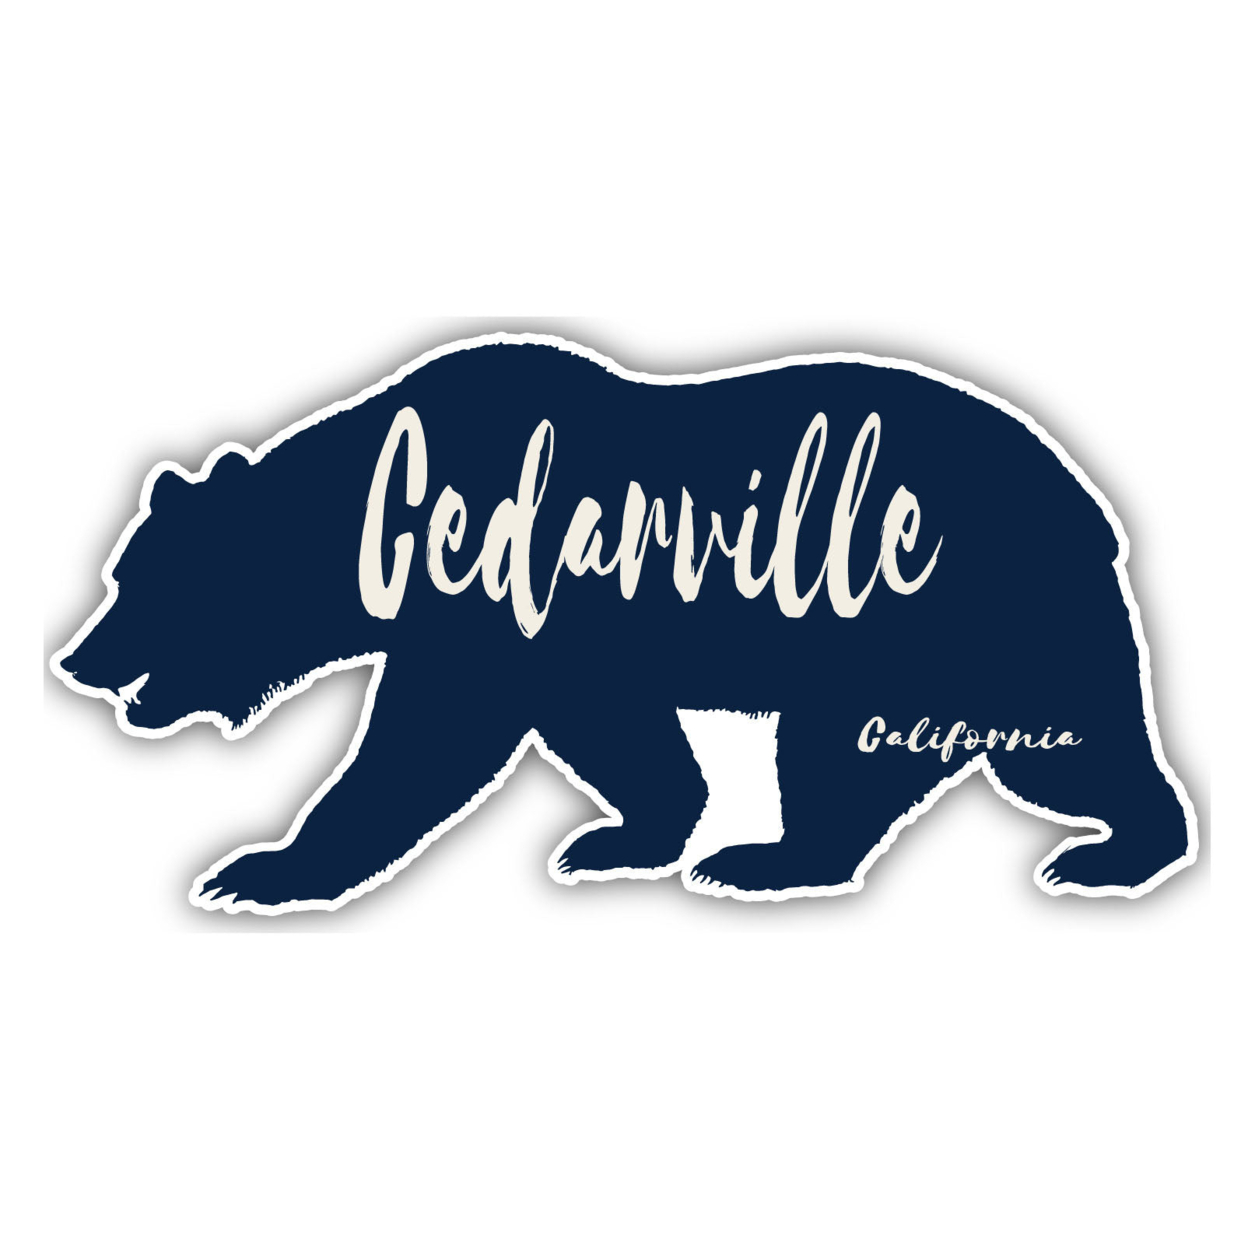 Cedarville California Souvenir Decorative Stickers (Choose Theme And Size) - 4-Pack, 4-Inch, Bear